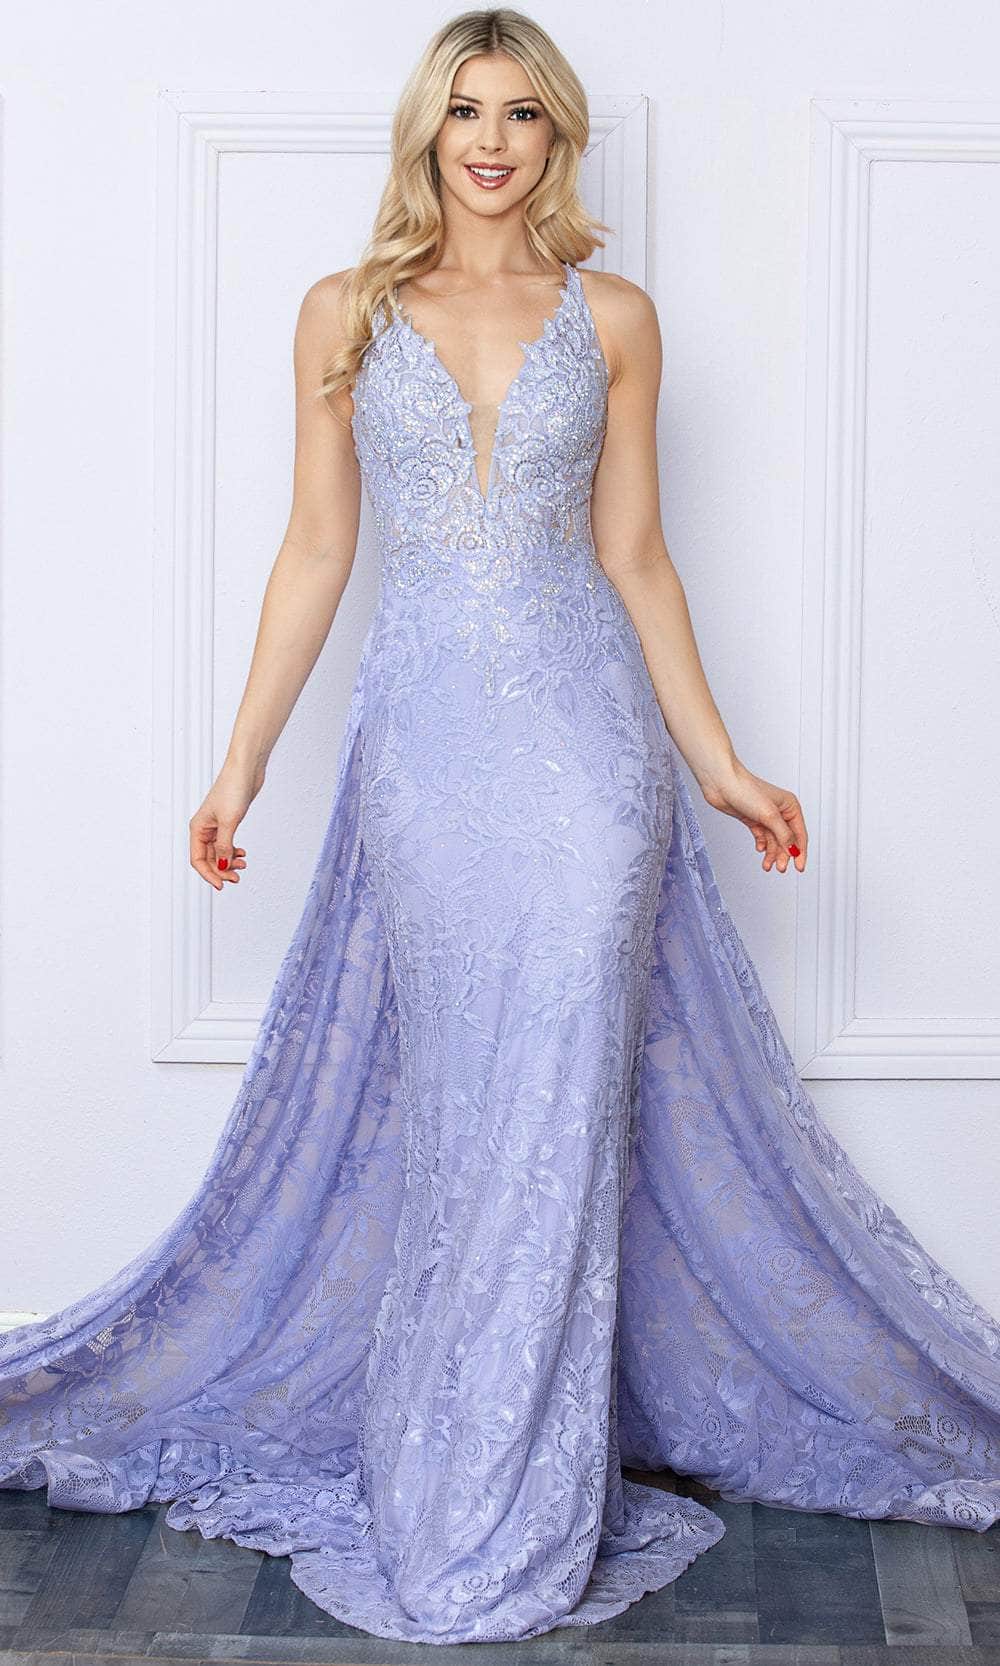 Nox Anabel G1353 - Lace V-Neck Prom Dress Special Occasion Dress 0 / Periwinkle